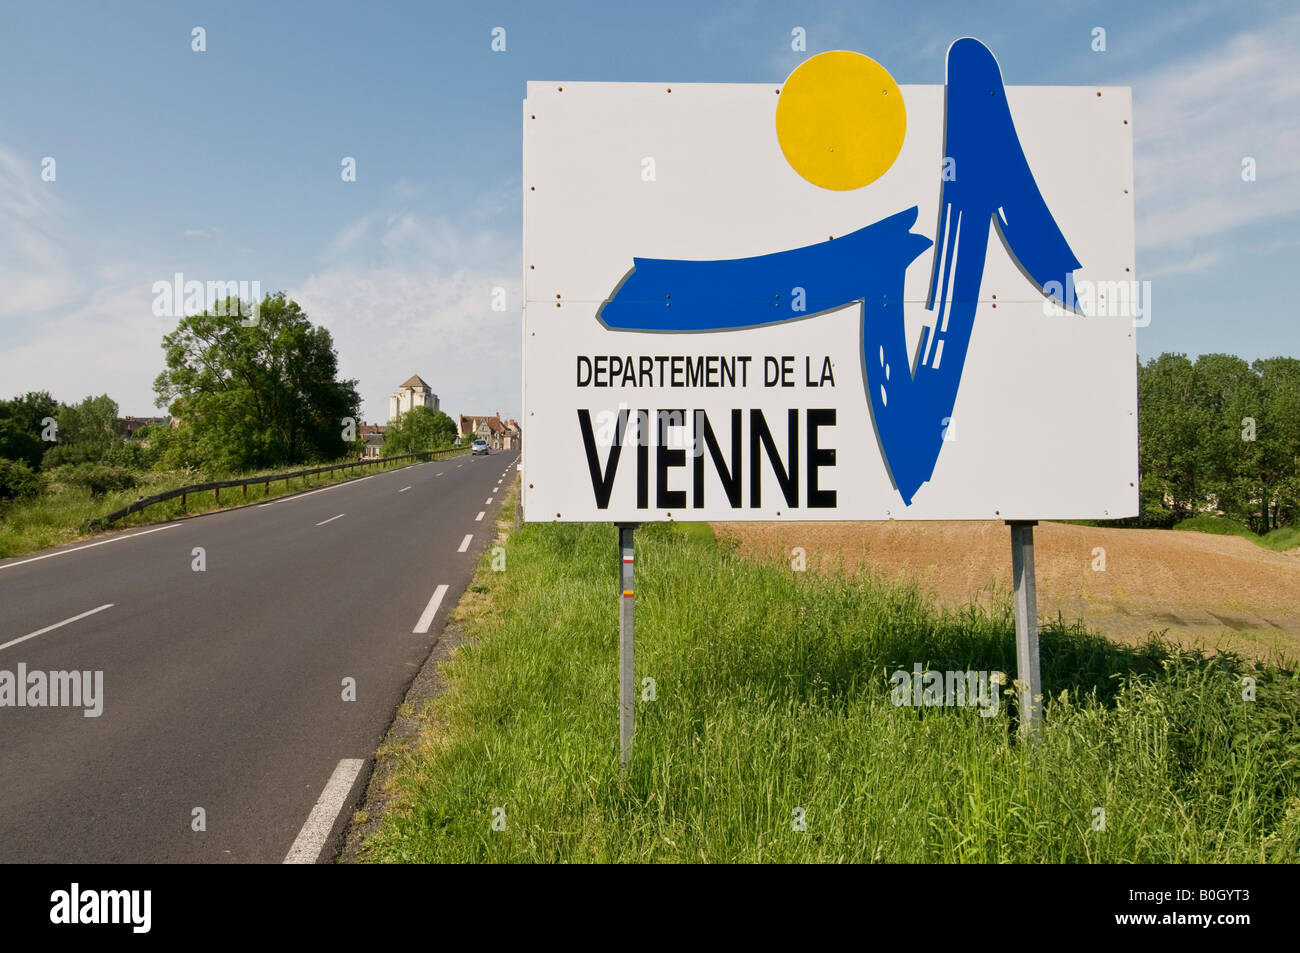 Sign for the département of the Vienne - La Roche Posay, France. Stock Photo